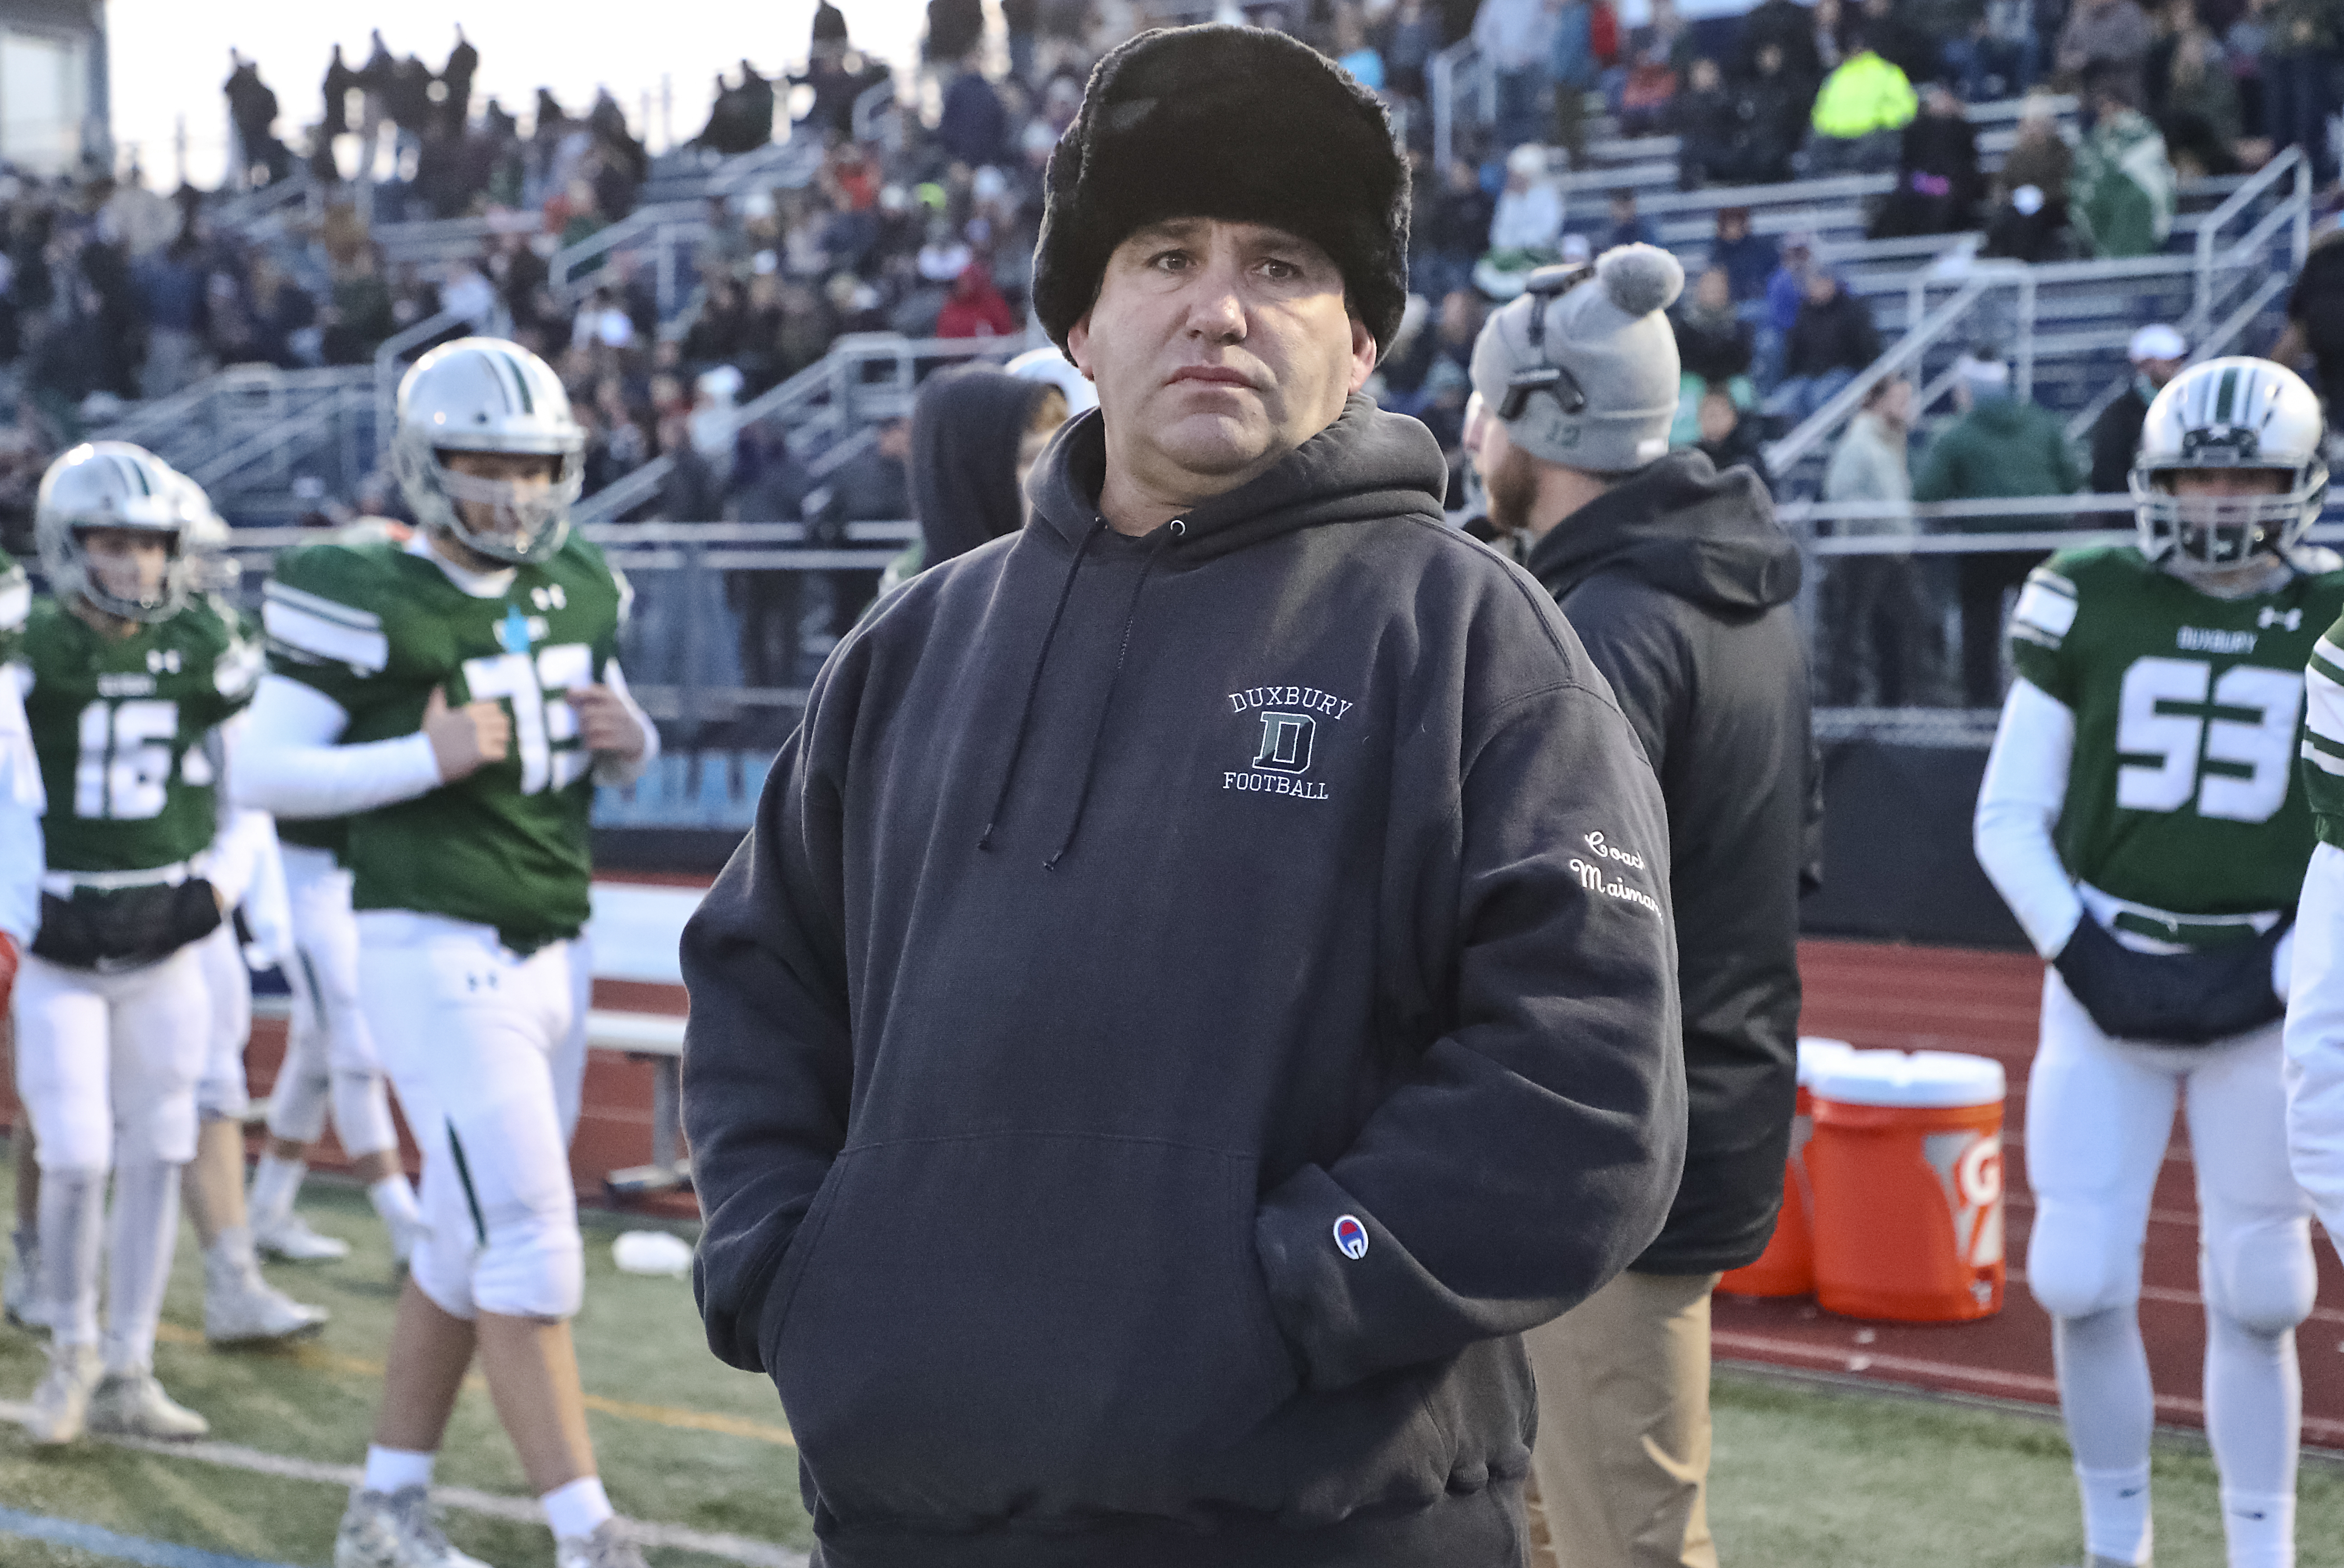 Duxbury football coach fired over team's use of anti-Semitic terms in  recent game - The Boston Globe